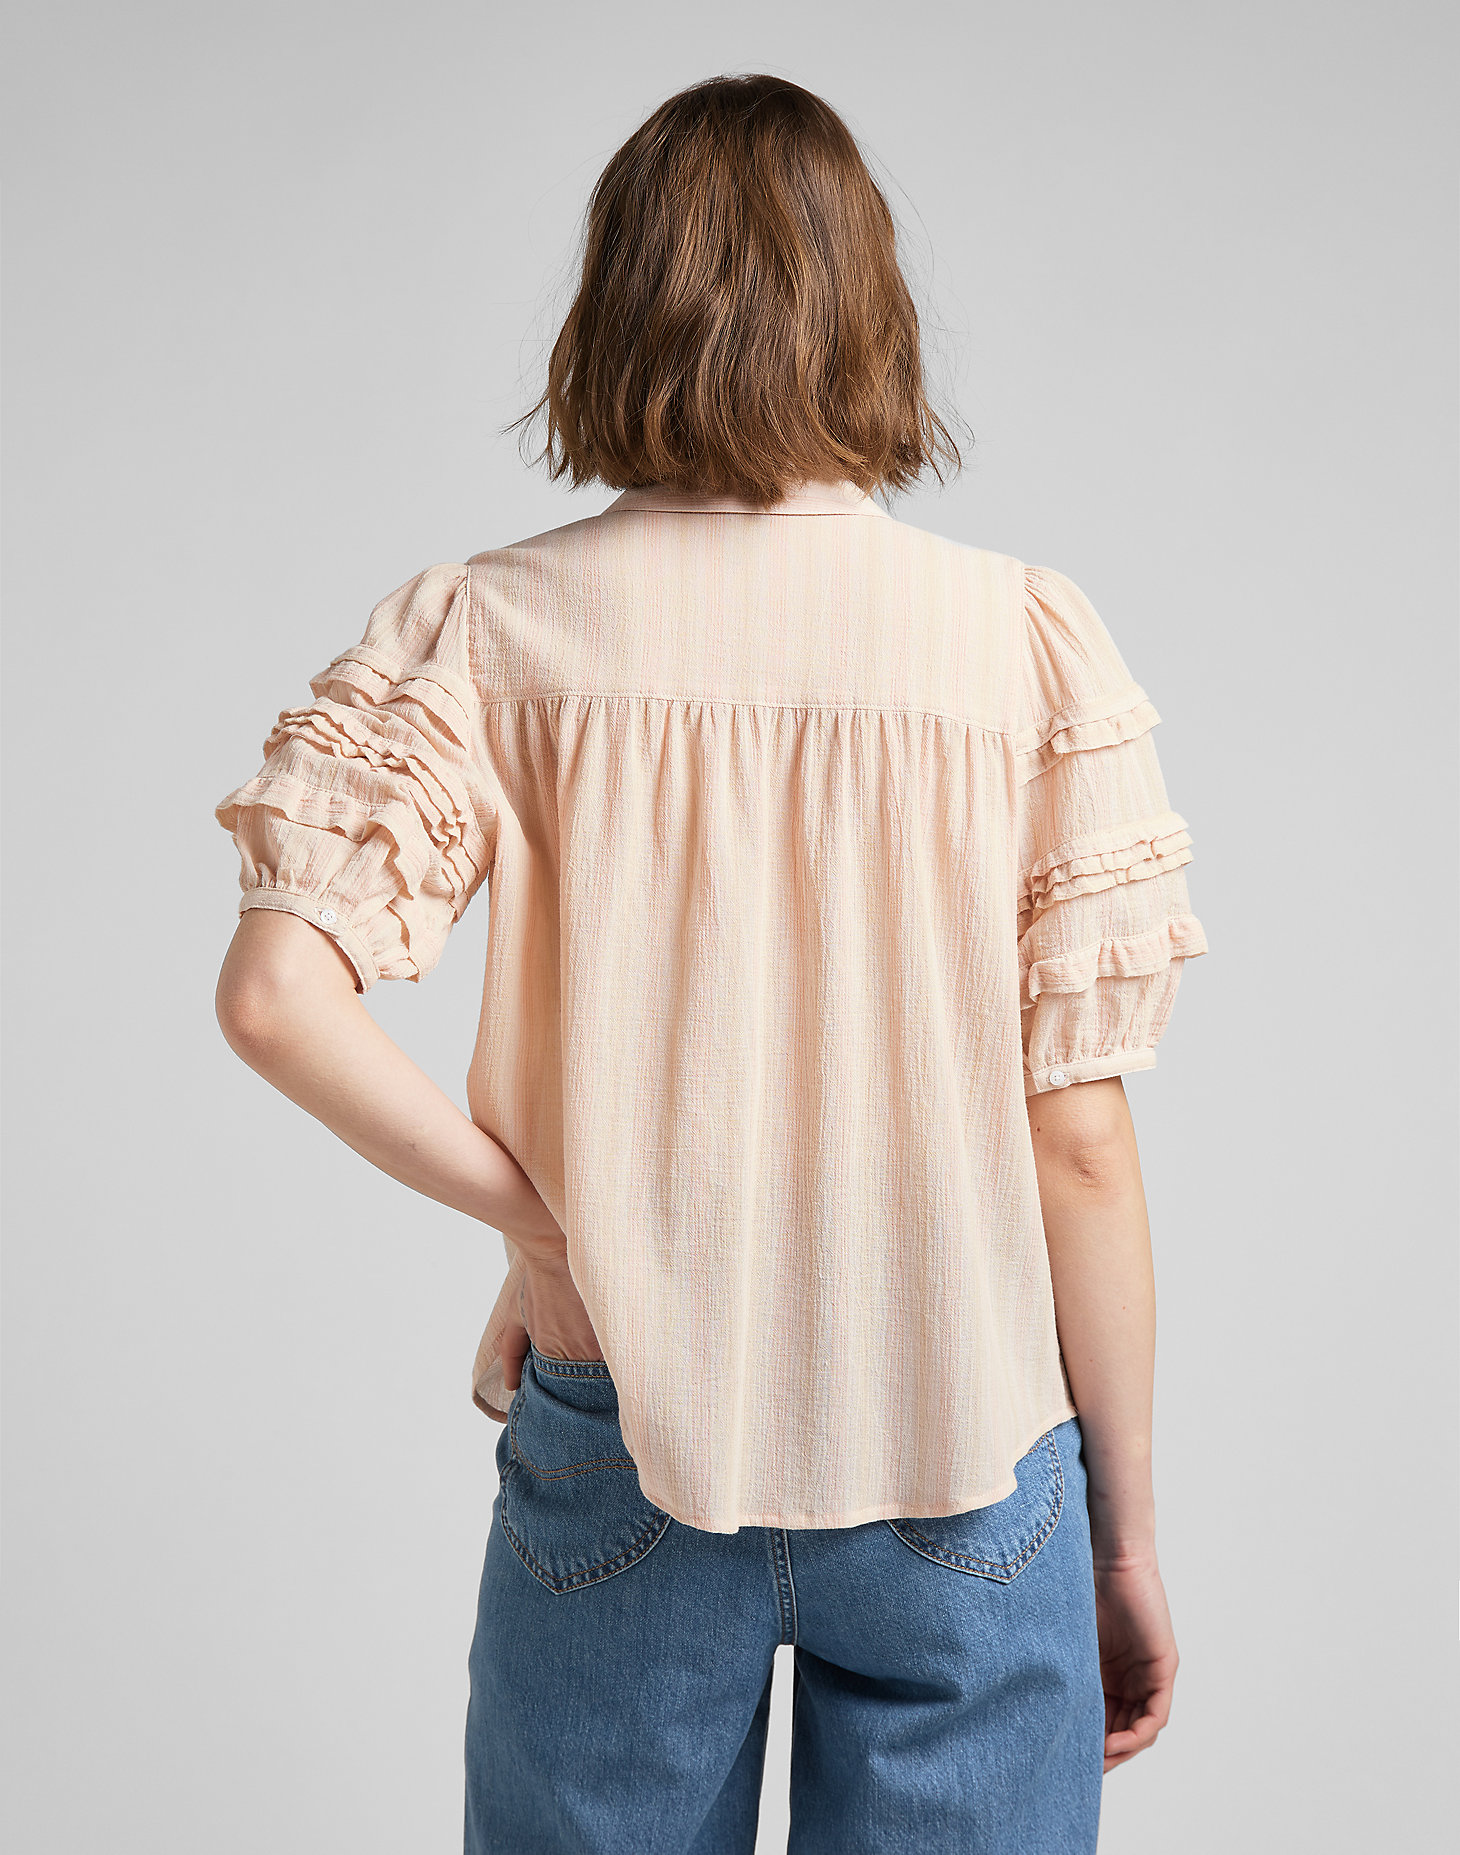 Birthday Cake Blouse in Soft Pink alternative view 3